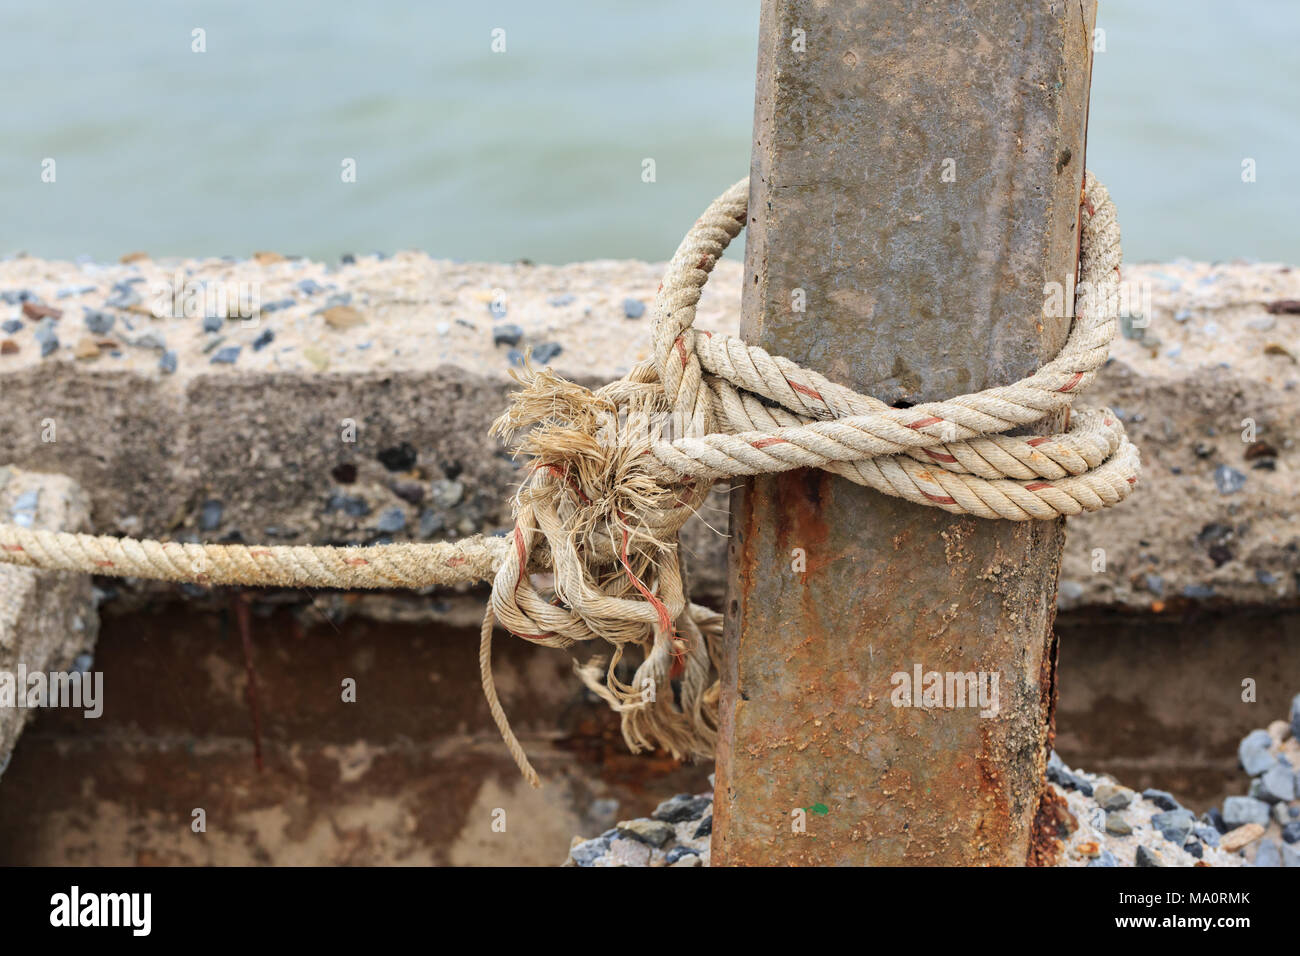 Old fishing boat rope with a Tied Knot around the old concrete